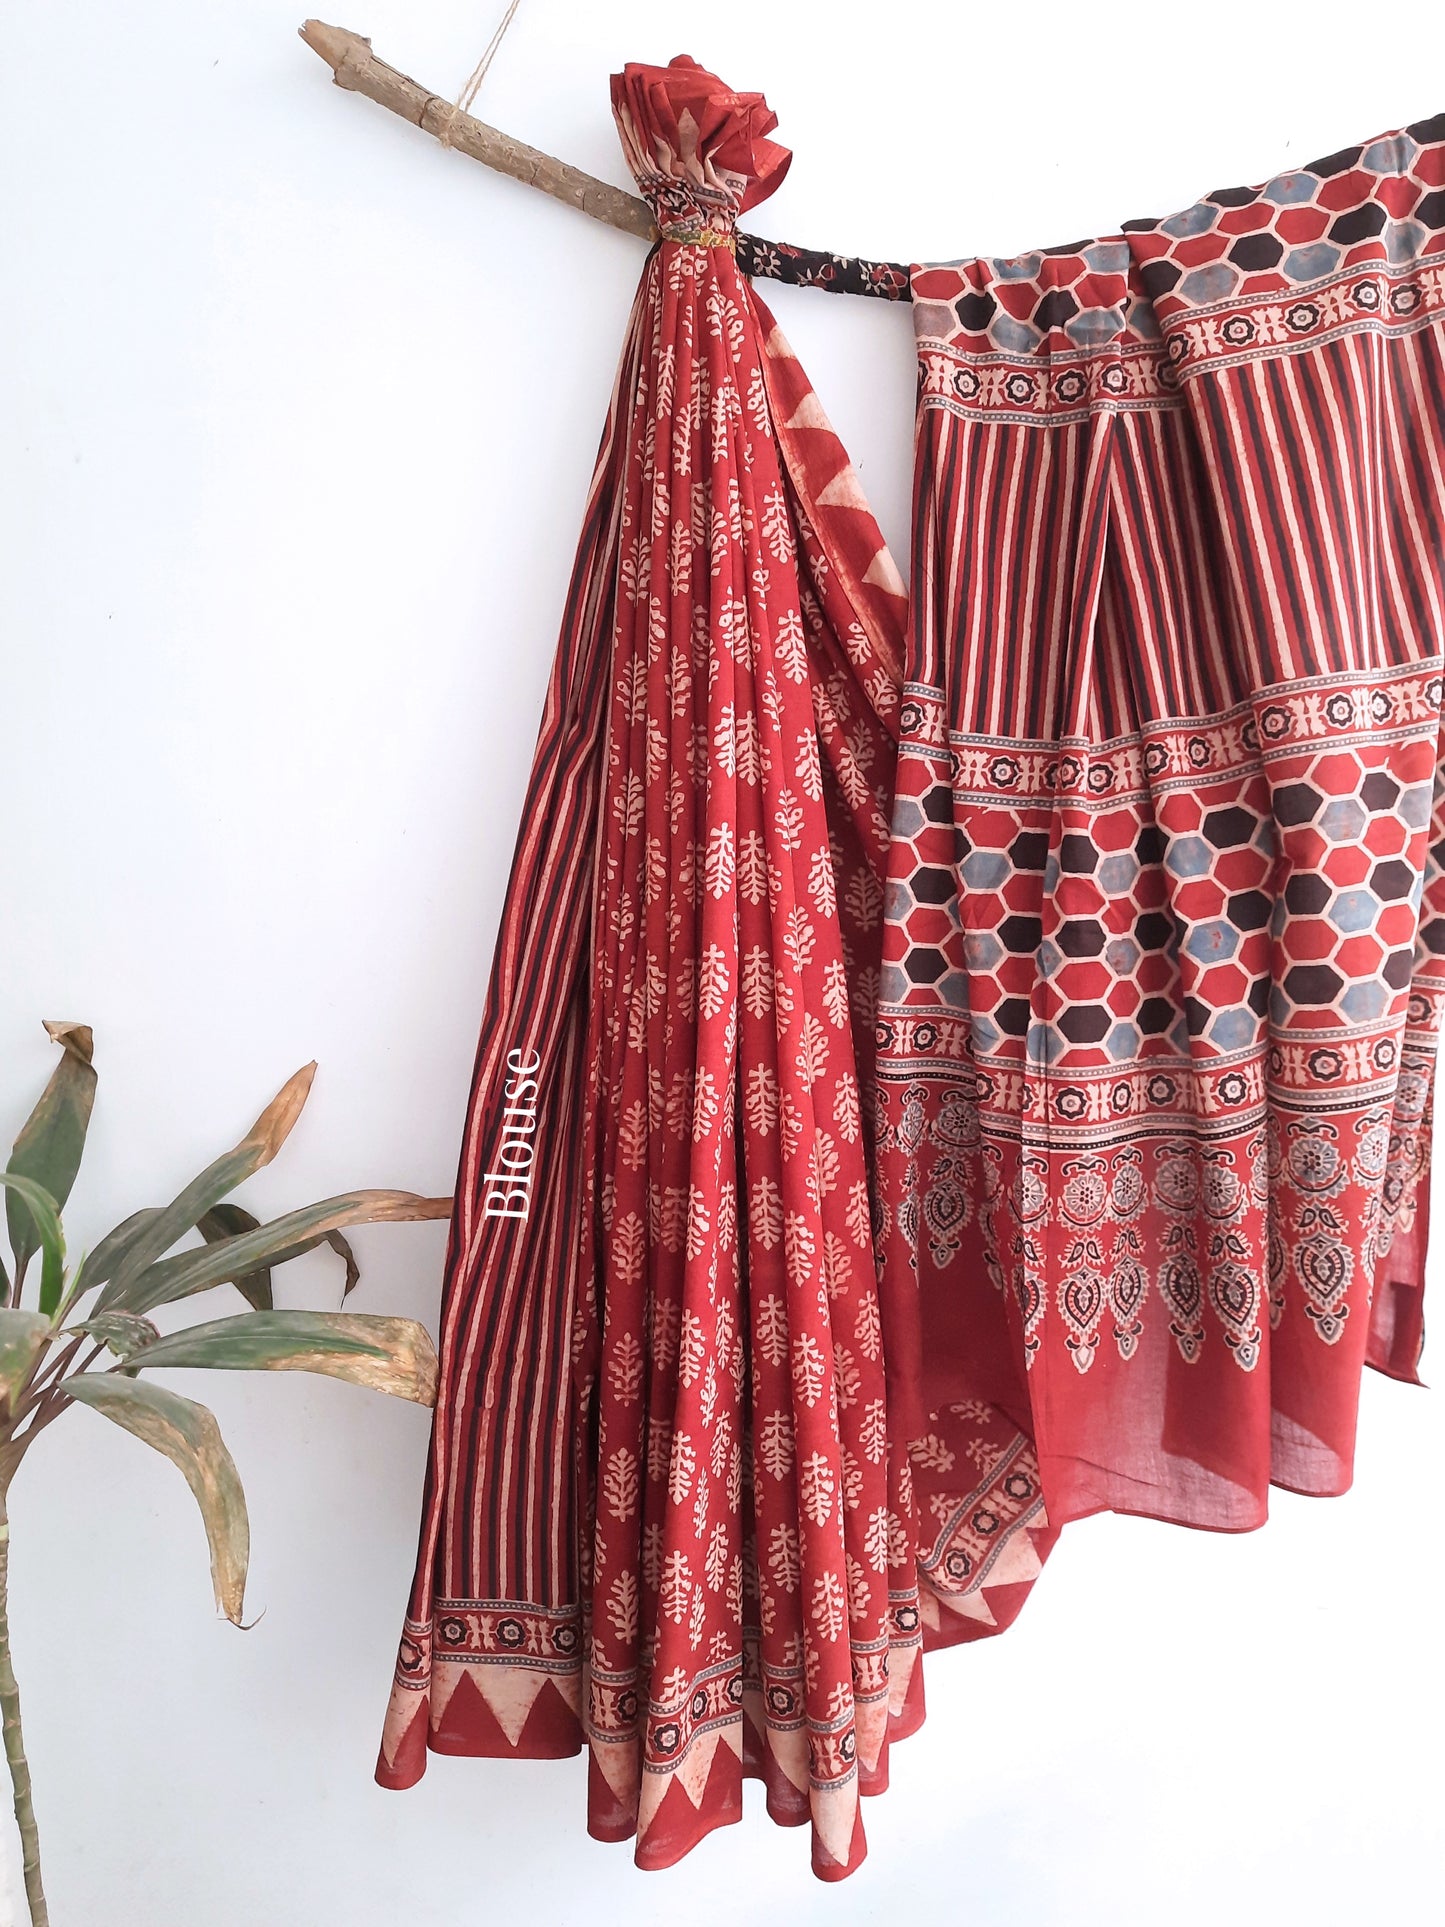 Madder Dyed Ajrakh Cotton Saree by Turquoisethestore, showcasing intricate hand block prints and natural dyes, a sustainable summer staple.